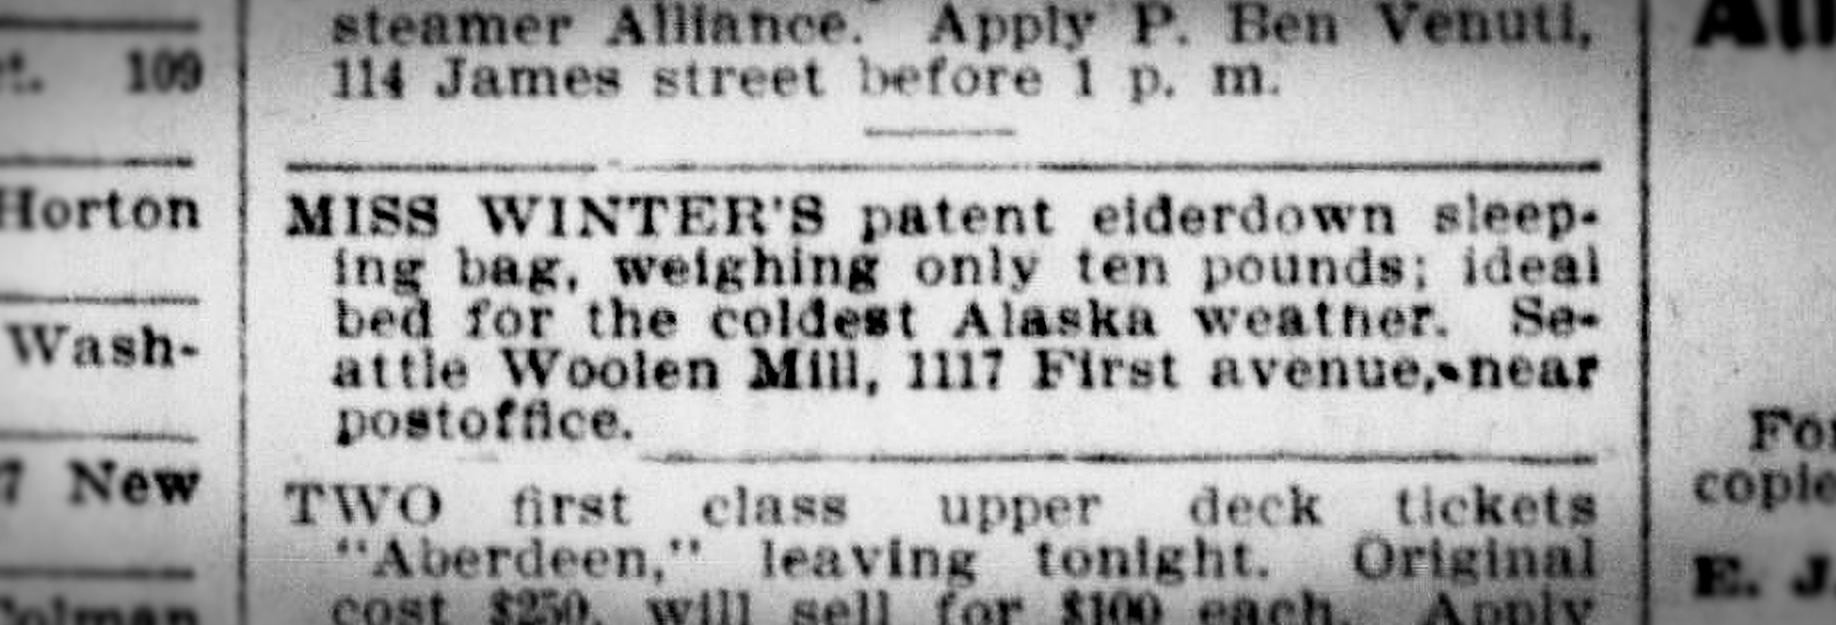 A close-up of an old newspaper advertisement saying: Miss Winters' patent elderdown sleeping bag, weighing only ten pounds; ideal bed for the coldest alaska weather. Seattle woolen mill, 1117 First avenue, near post office.